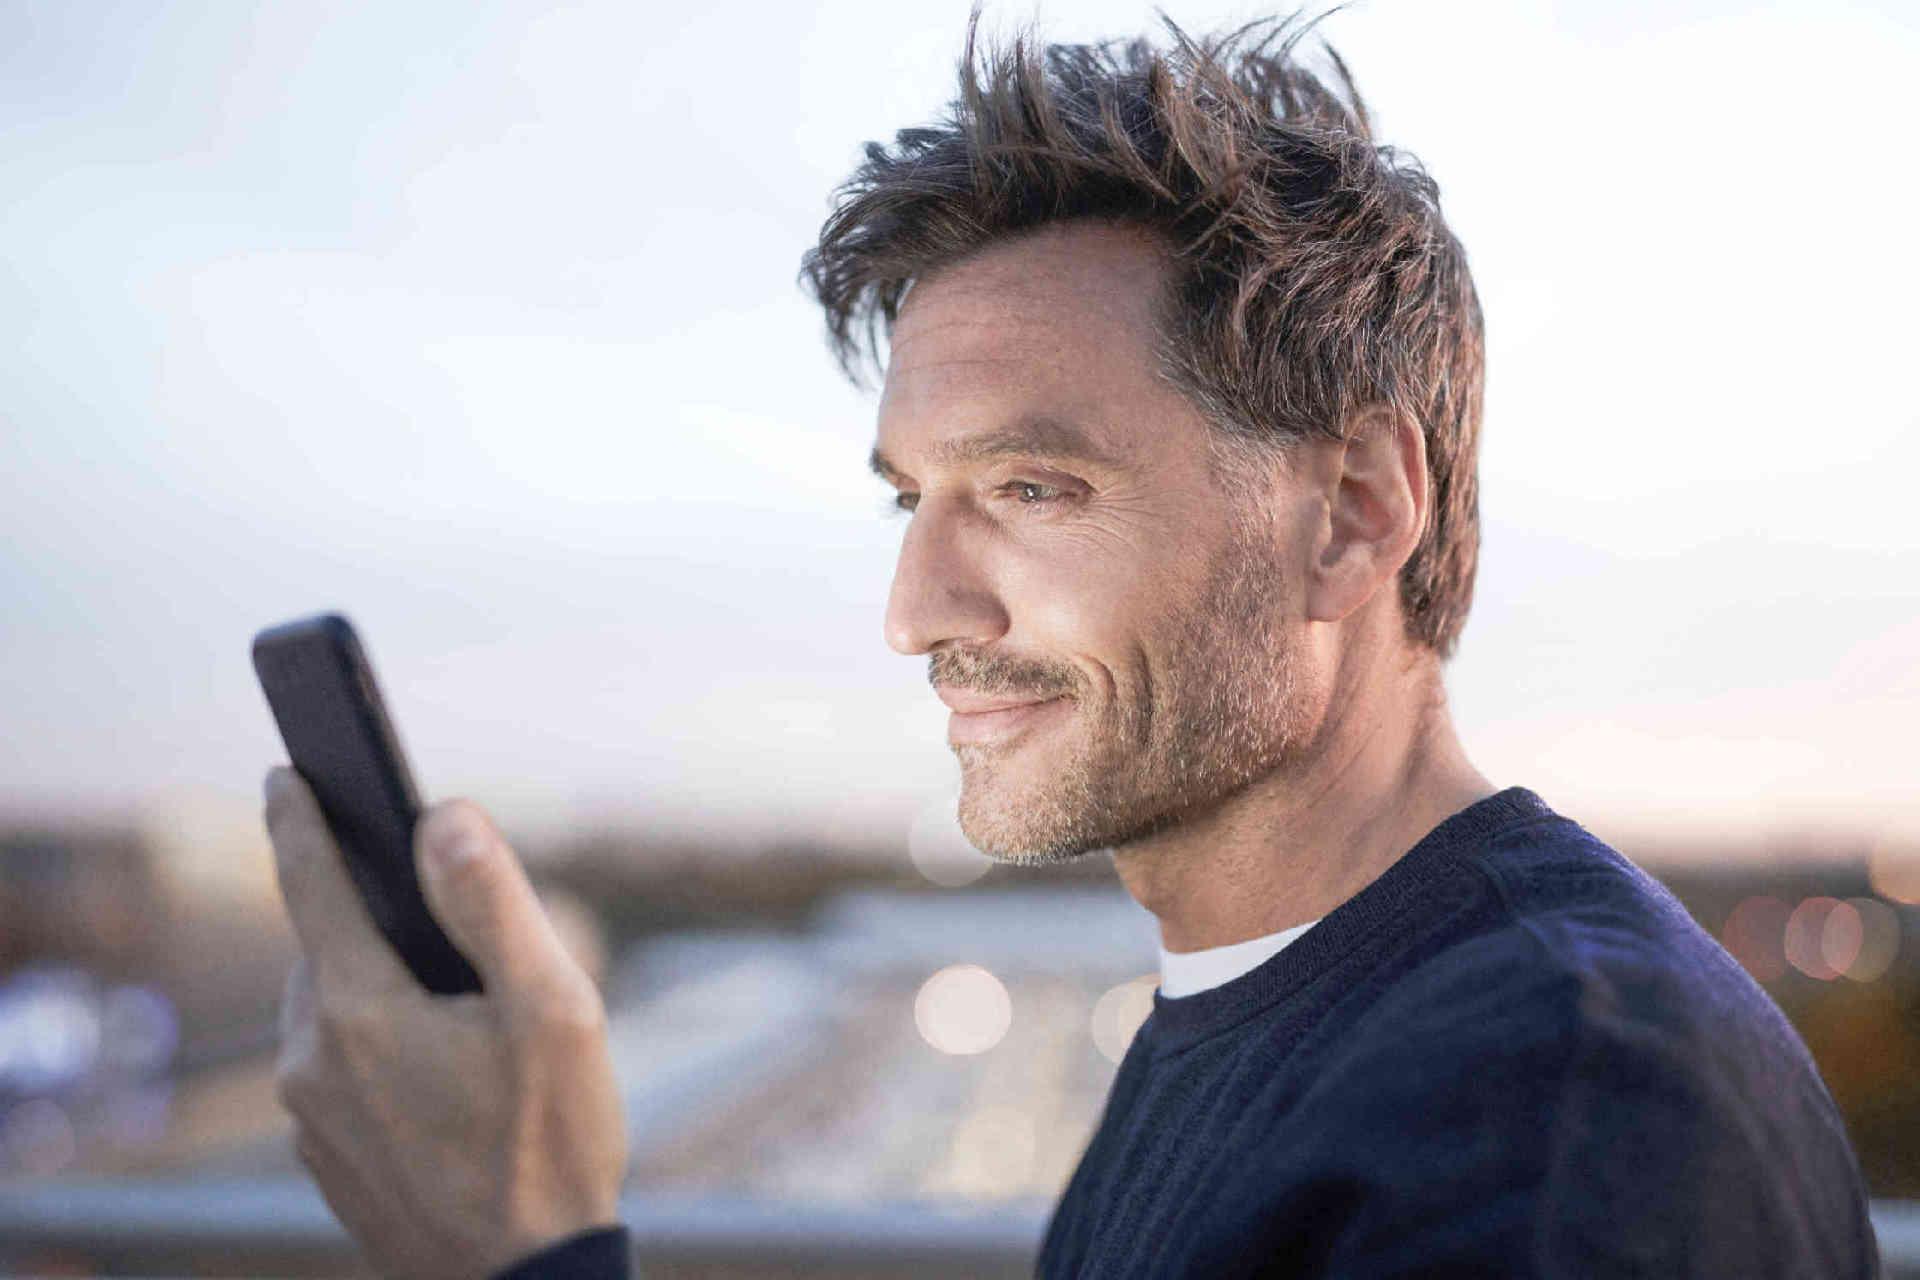 Man looking on a smartphone